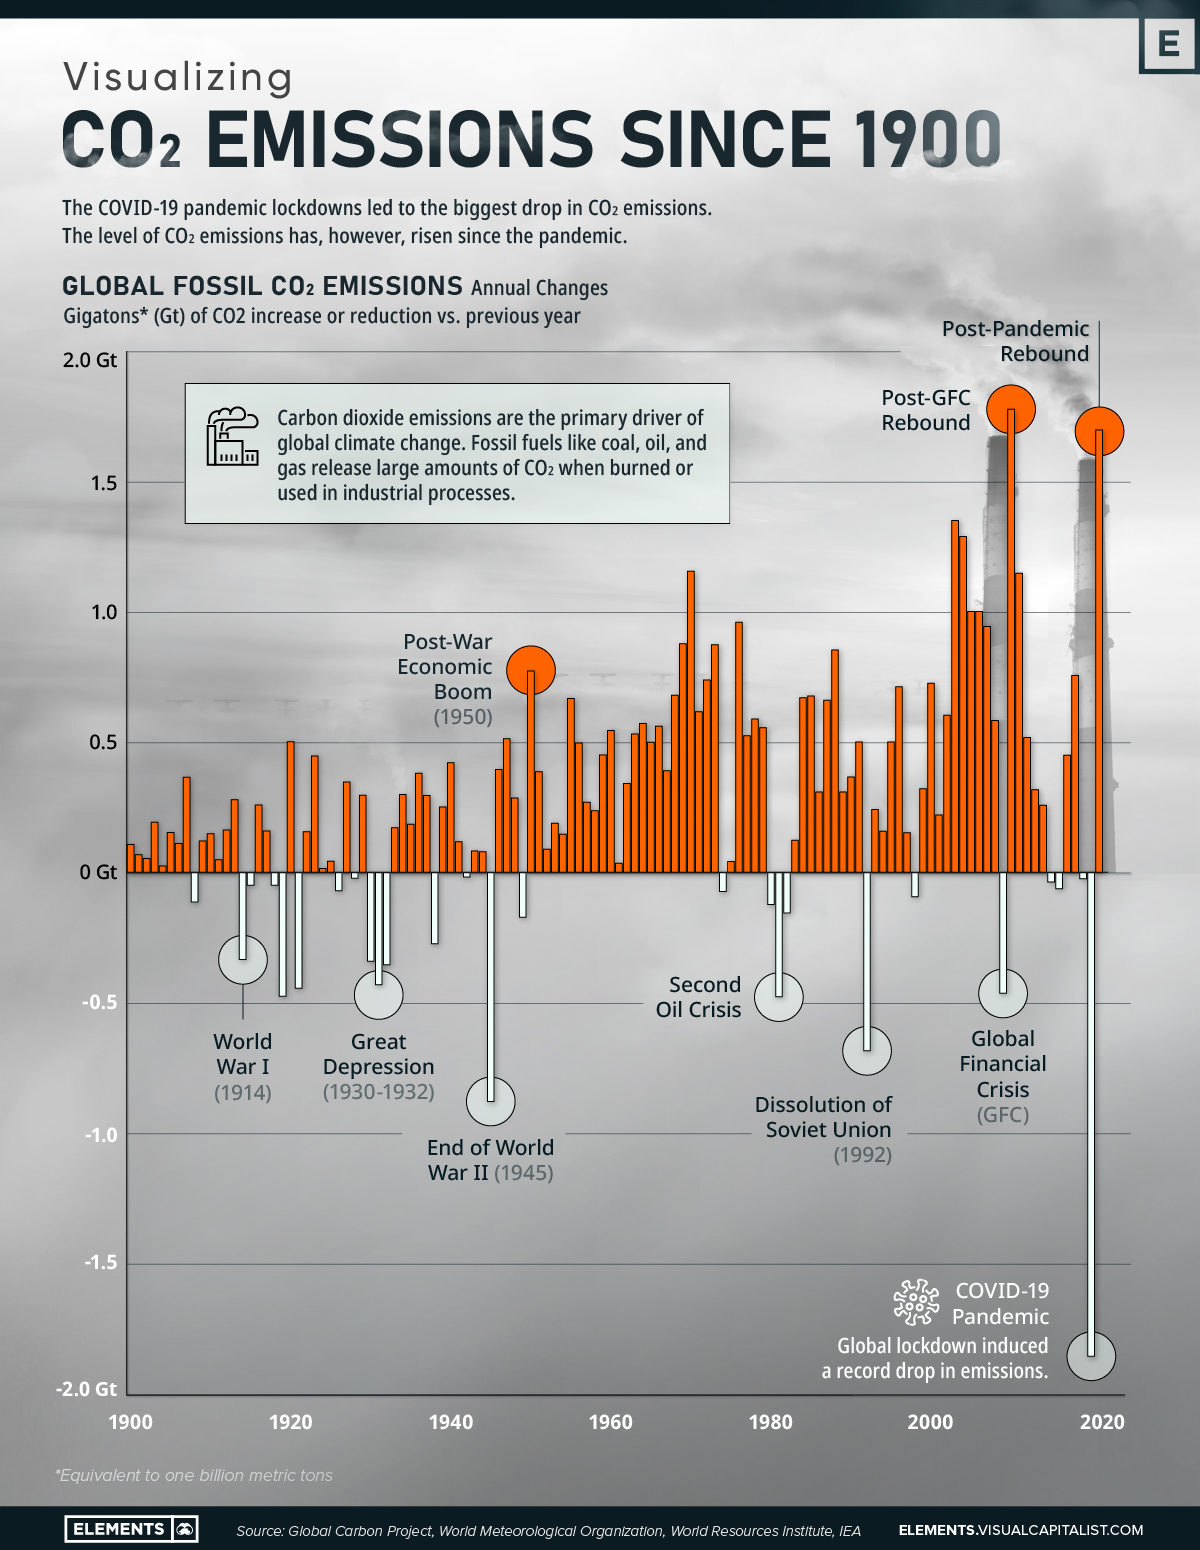 Visualizing Changes in CO₂ Emissions Since 1900